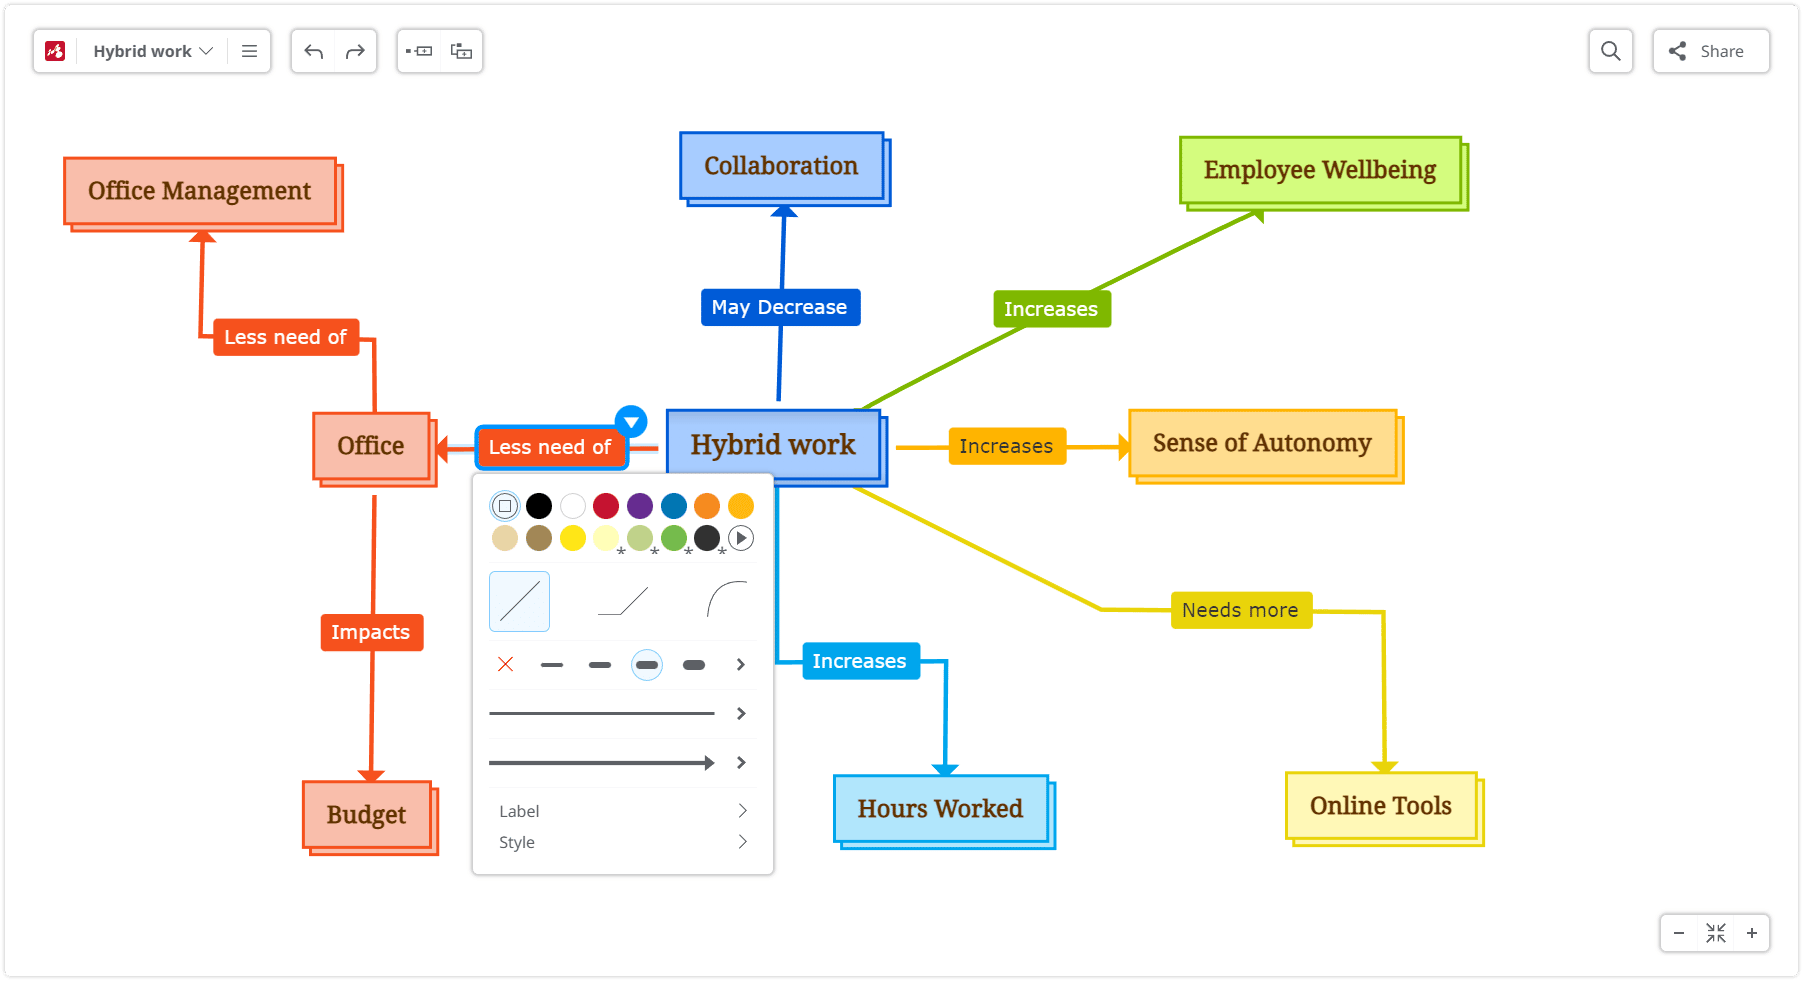 Concept map maker - Add relationships between concepts